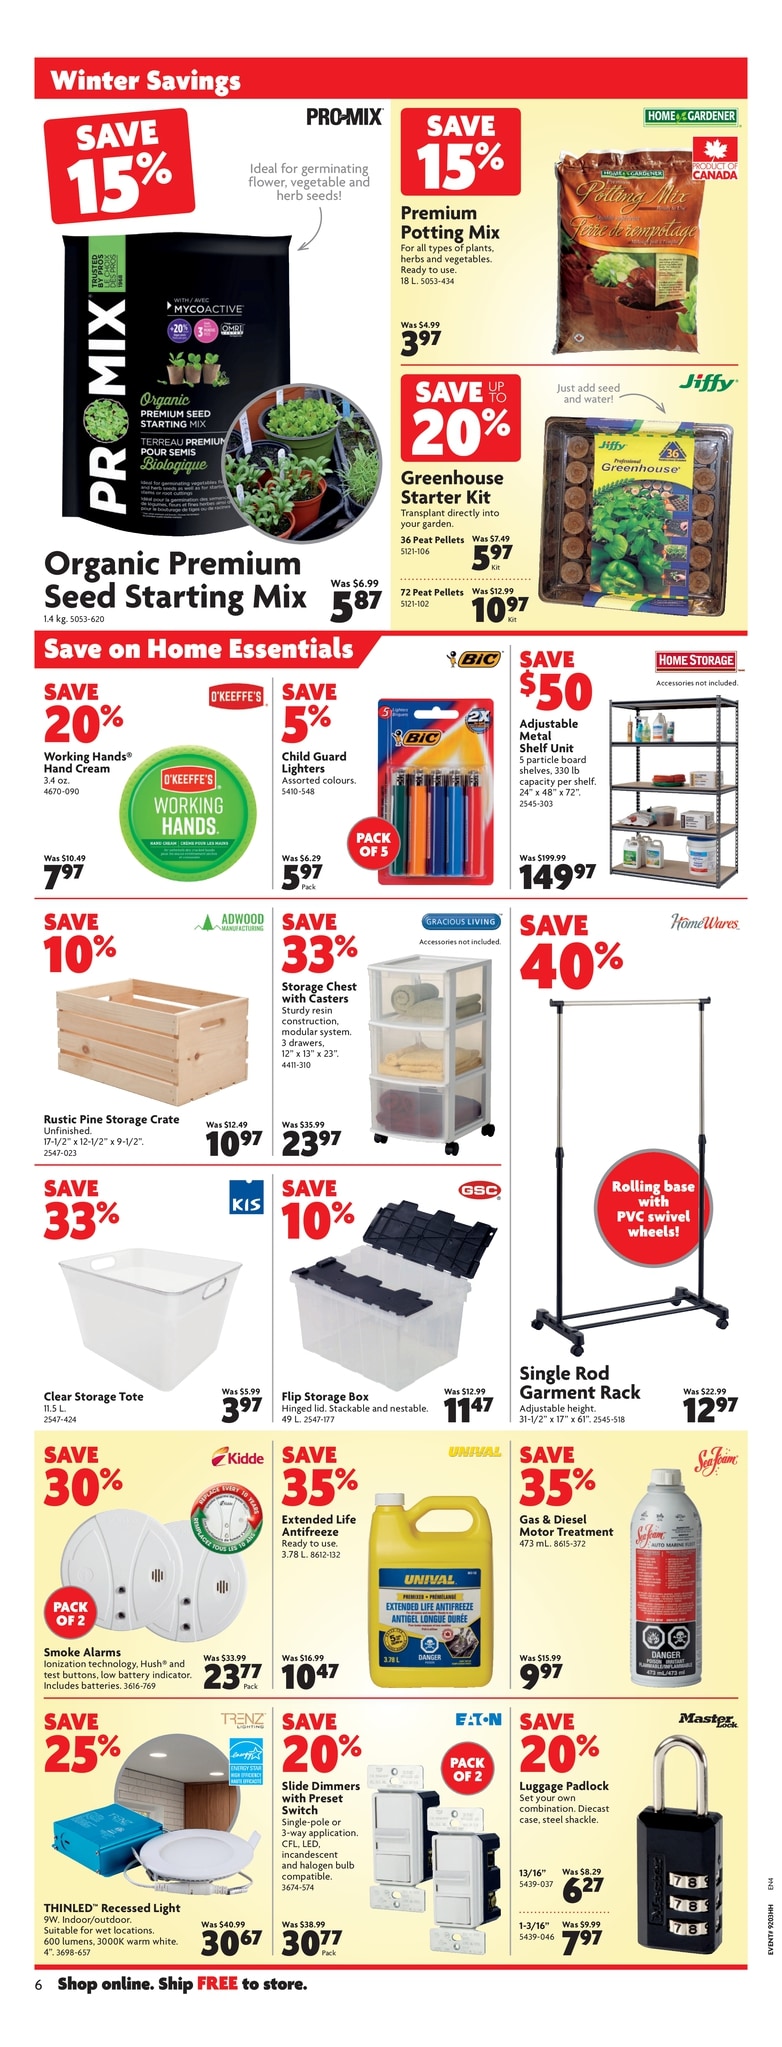 Home Hardware - Weekly Flyer Specials - Page 7